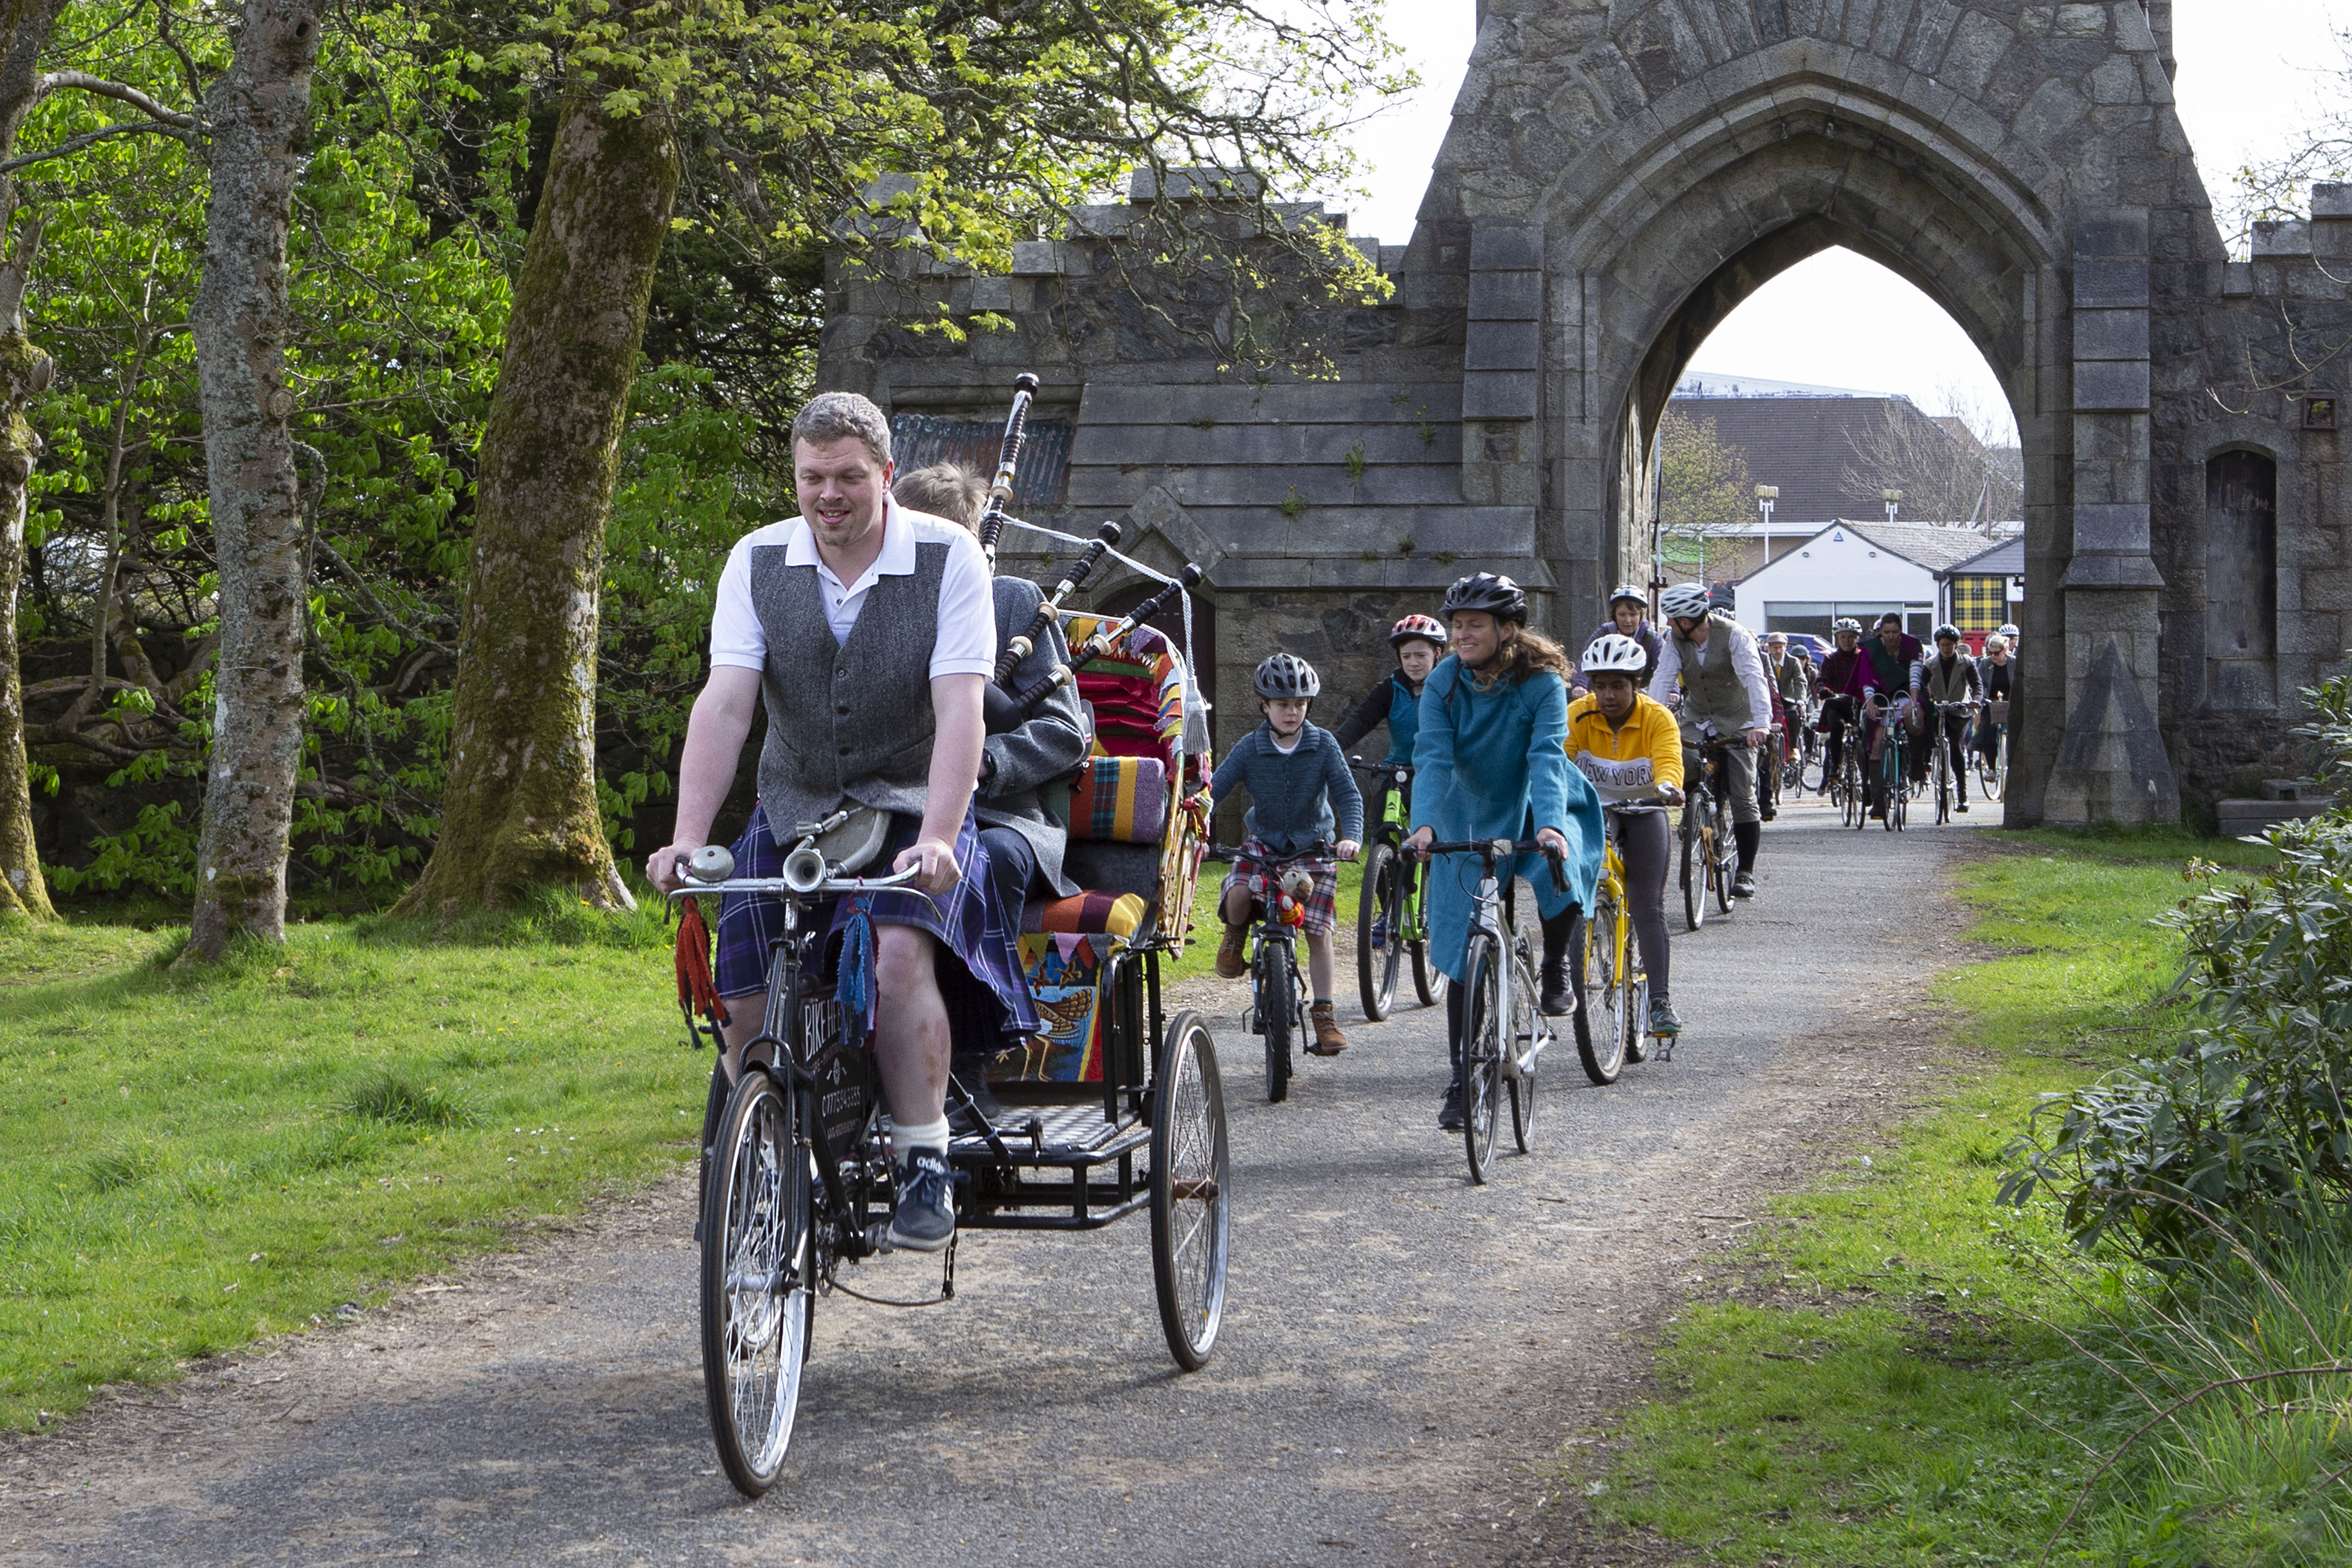 The annual Harris Tweed cycle event took place in Stornoway over the weekend.